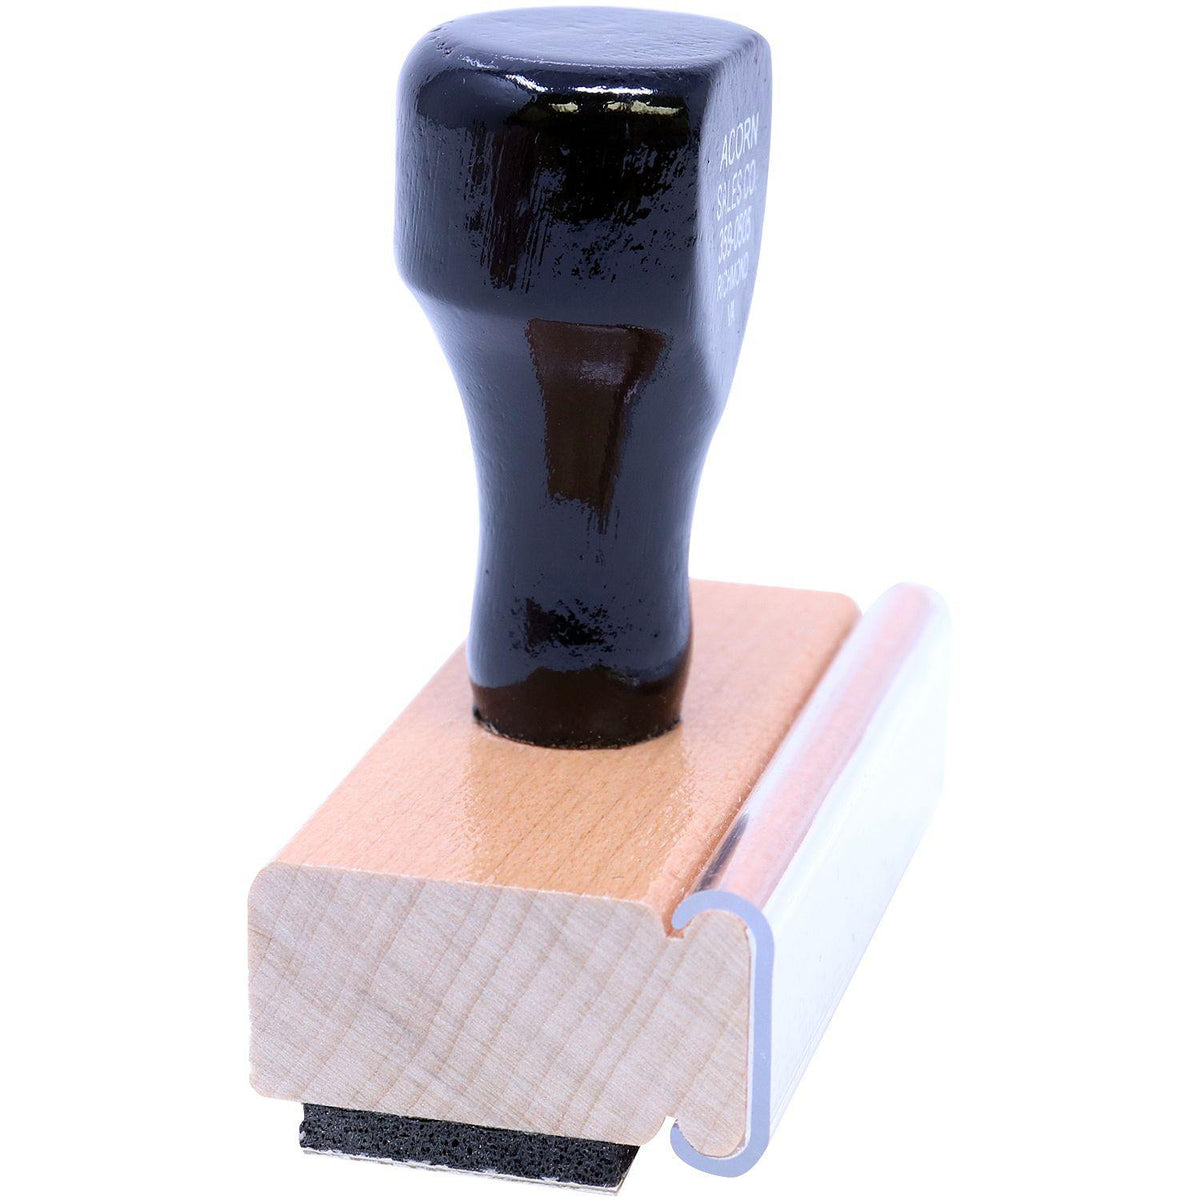 Side View of Large Bold Physical Due Rubber Stamp at an Angle